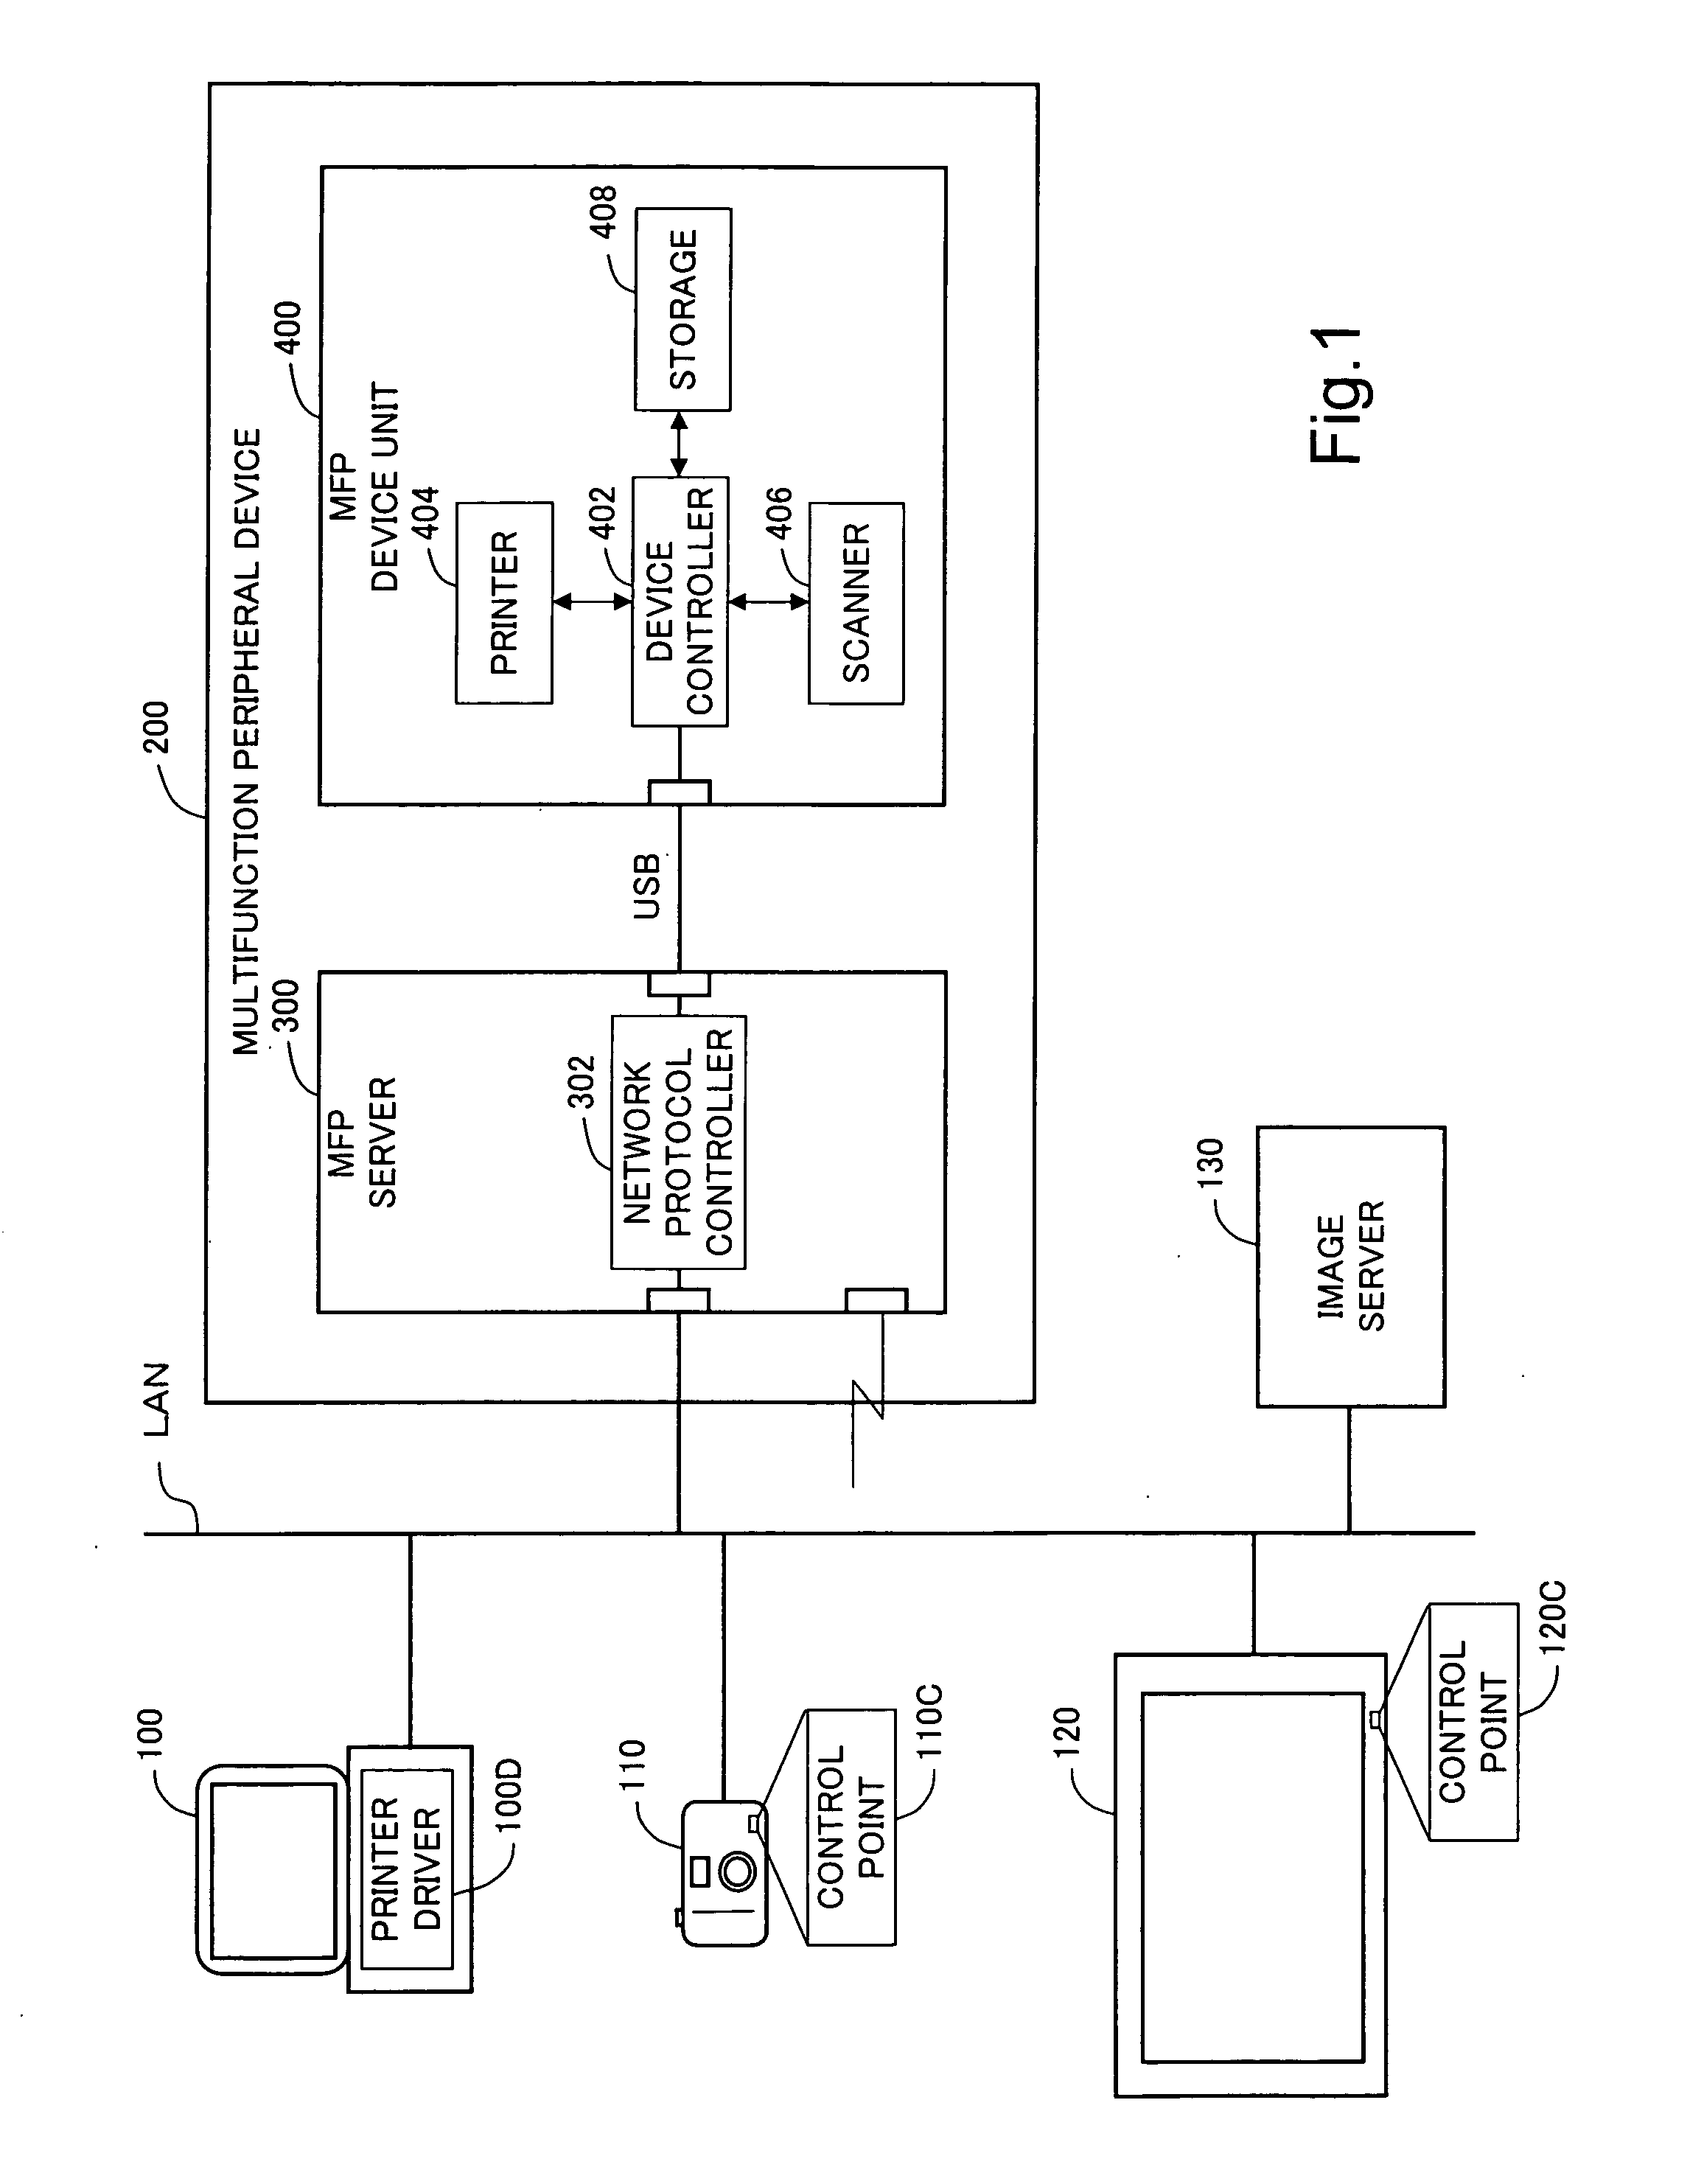 Control of network plug-and-play compliant device